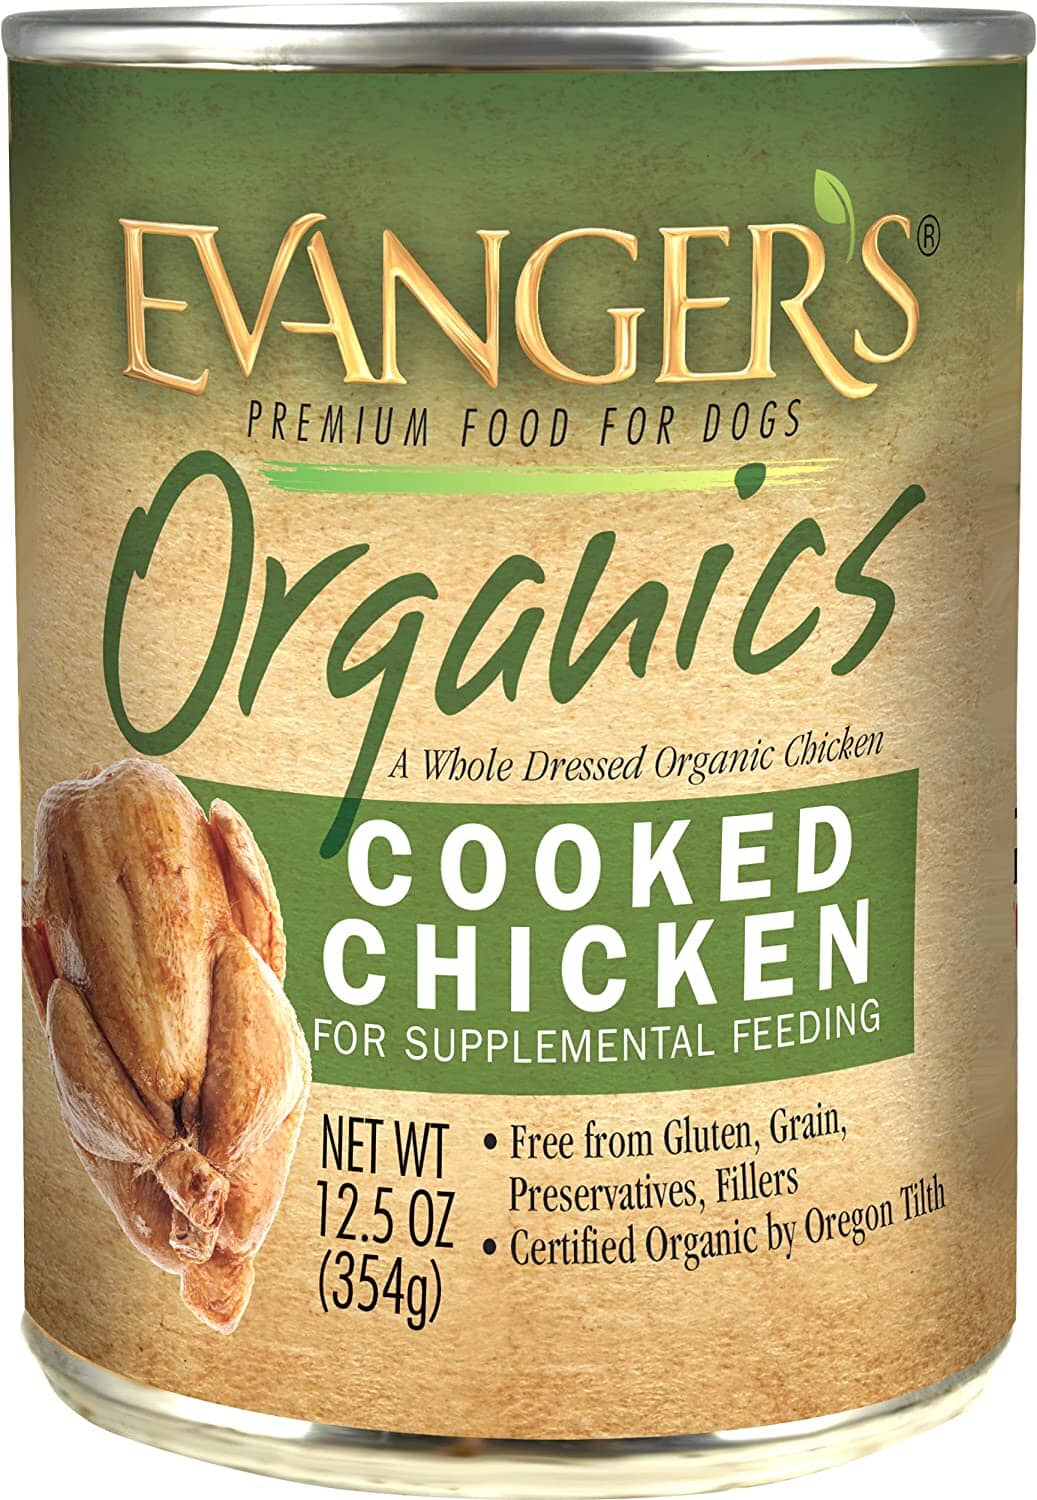 Evanger's Organics Cooked Chicken Canned Dog Food - 12.8 Oz - Case of 12  